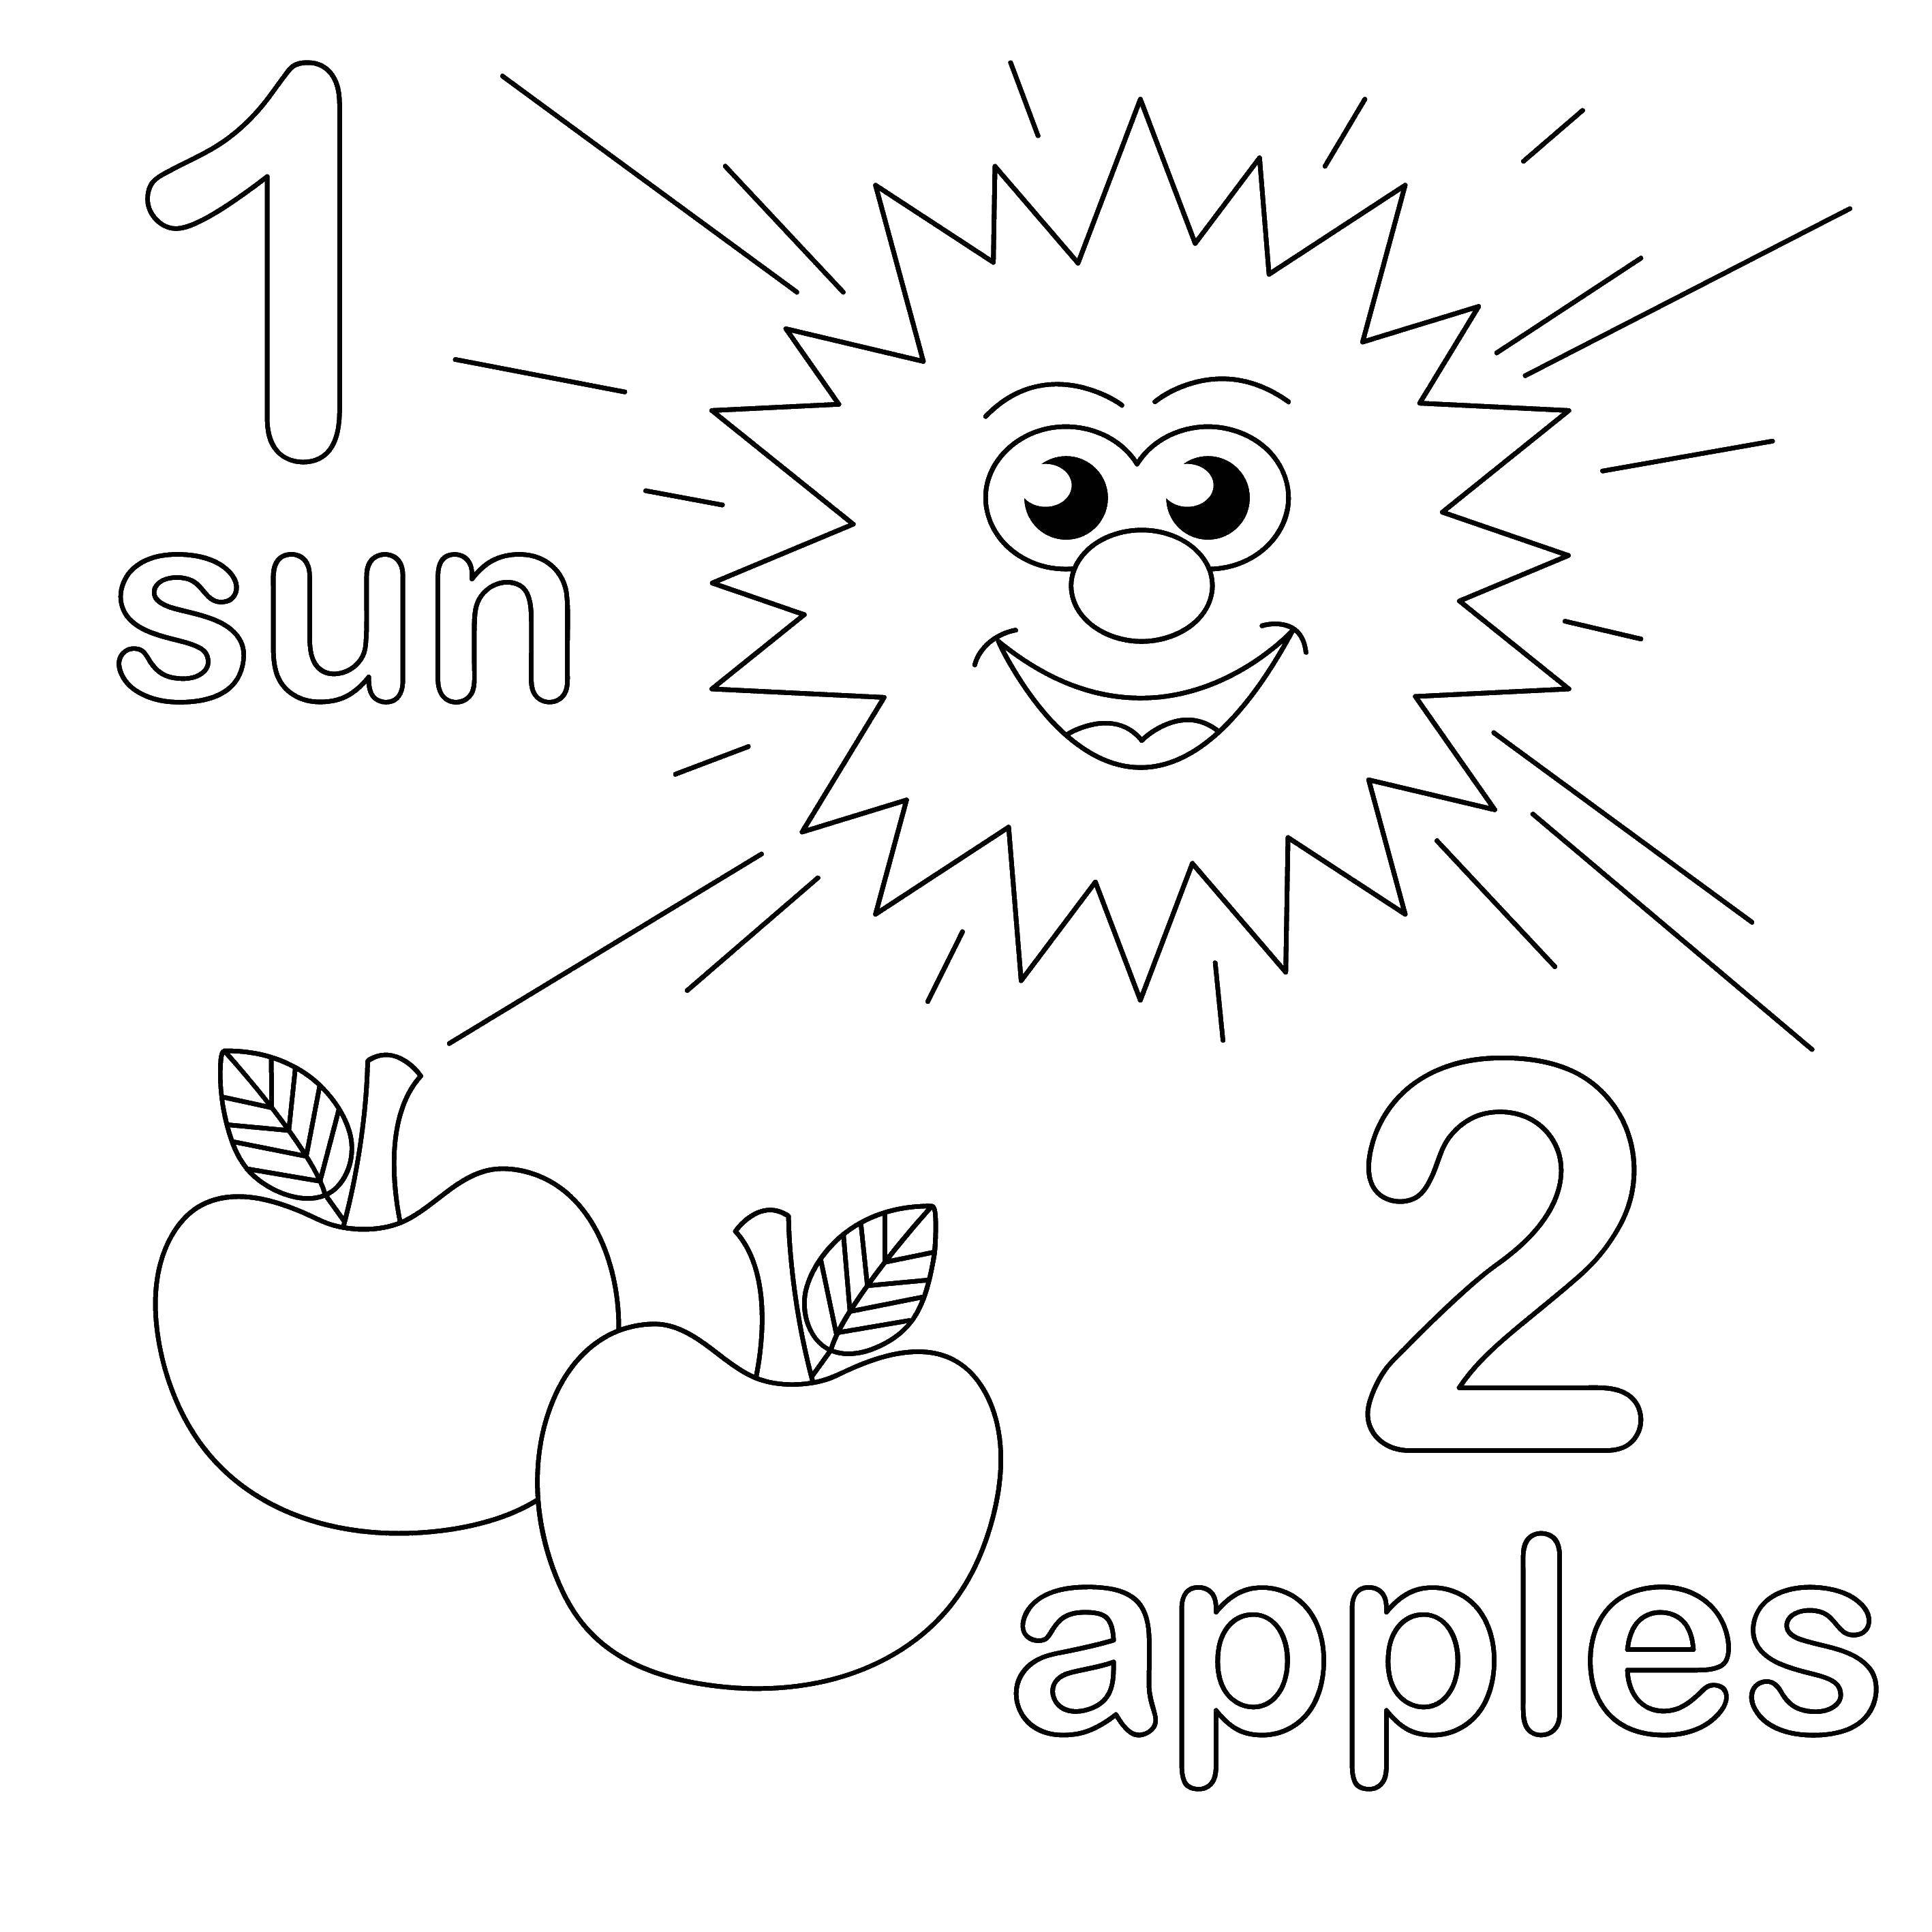 Coloring 1 sun, 2 apples. Category Learn to count. Tags:  numbers, numbers, sun, Apple.